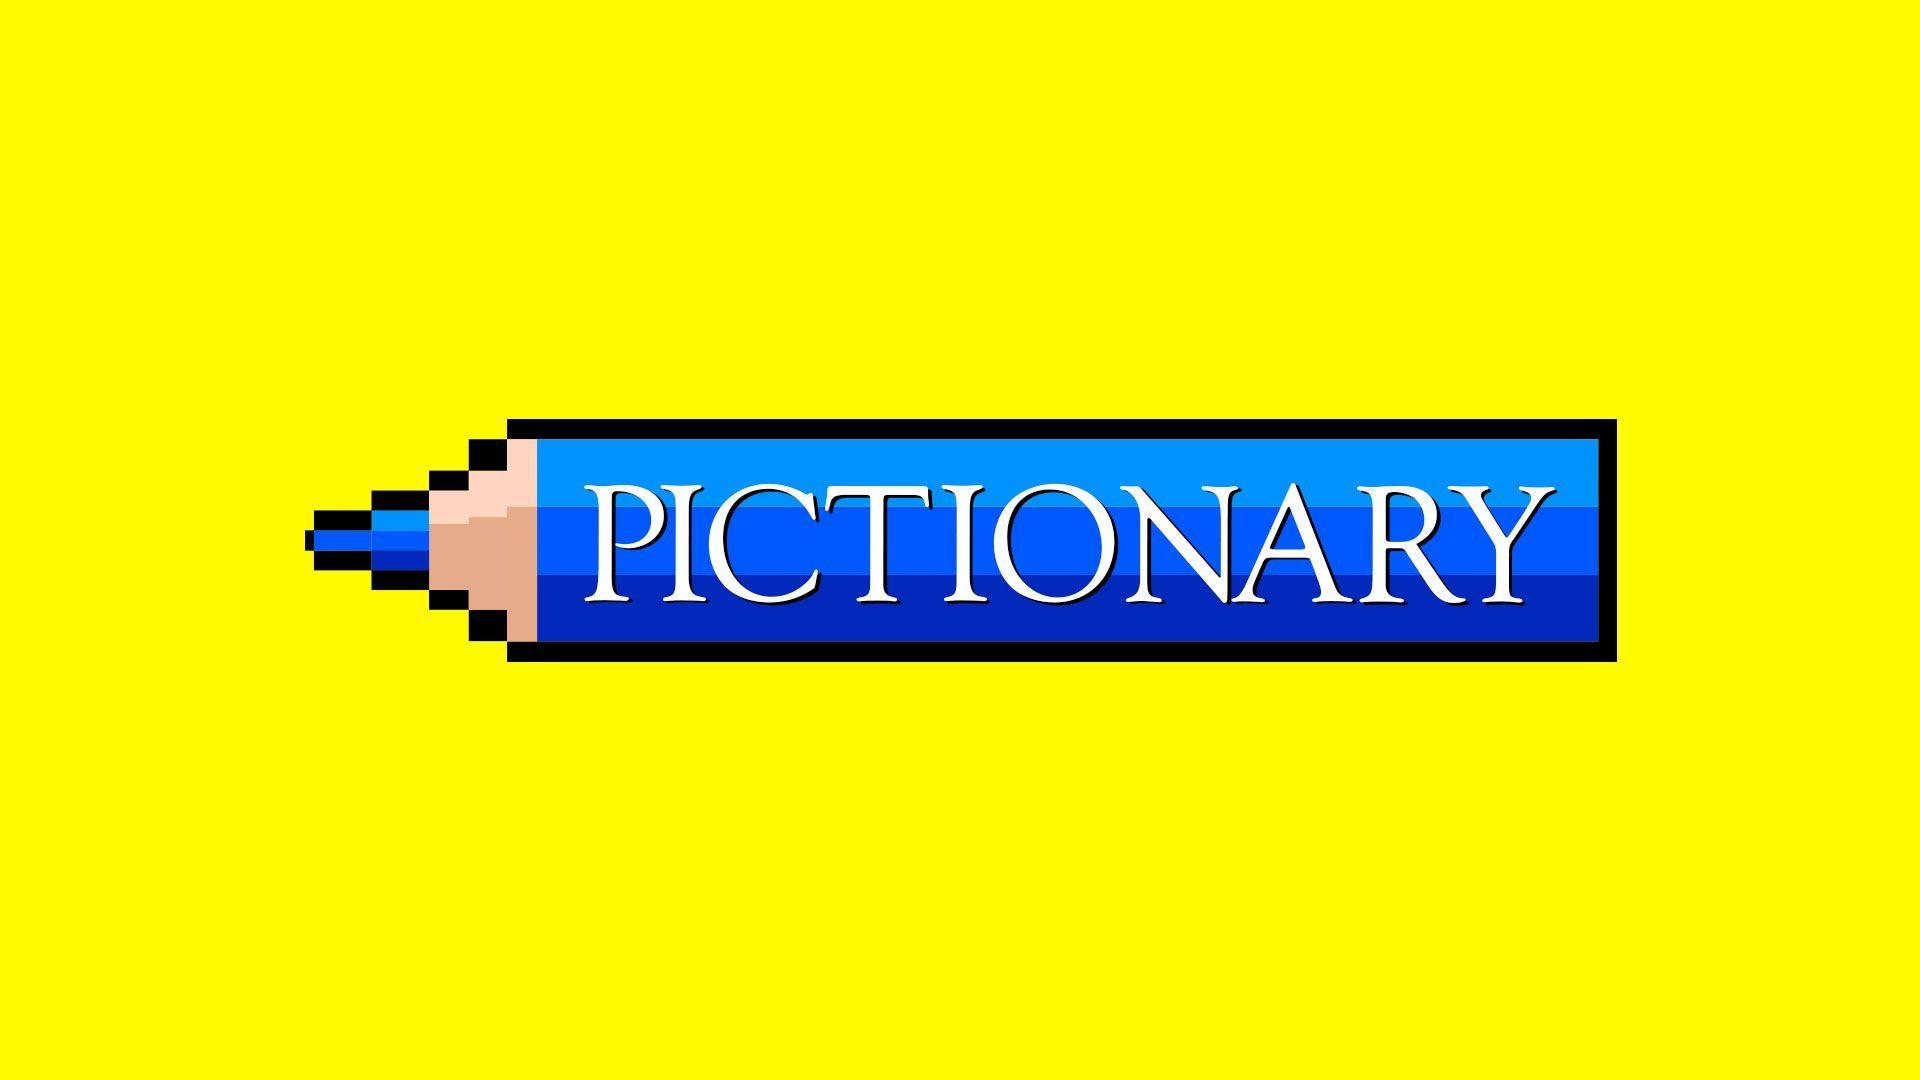 Pictionary Logo - AI takes on a children's game - Axios